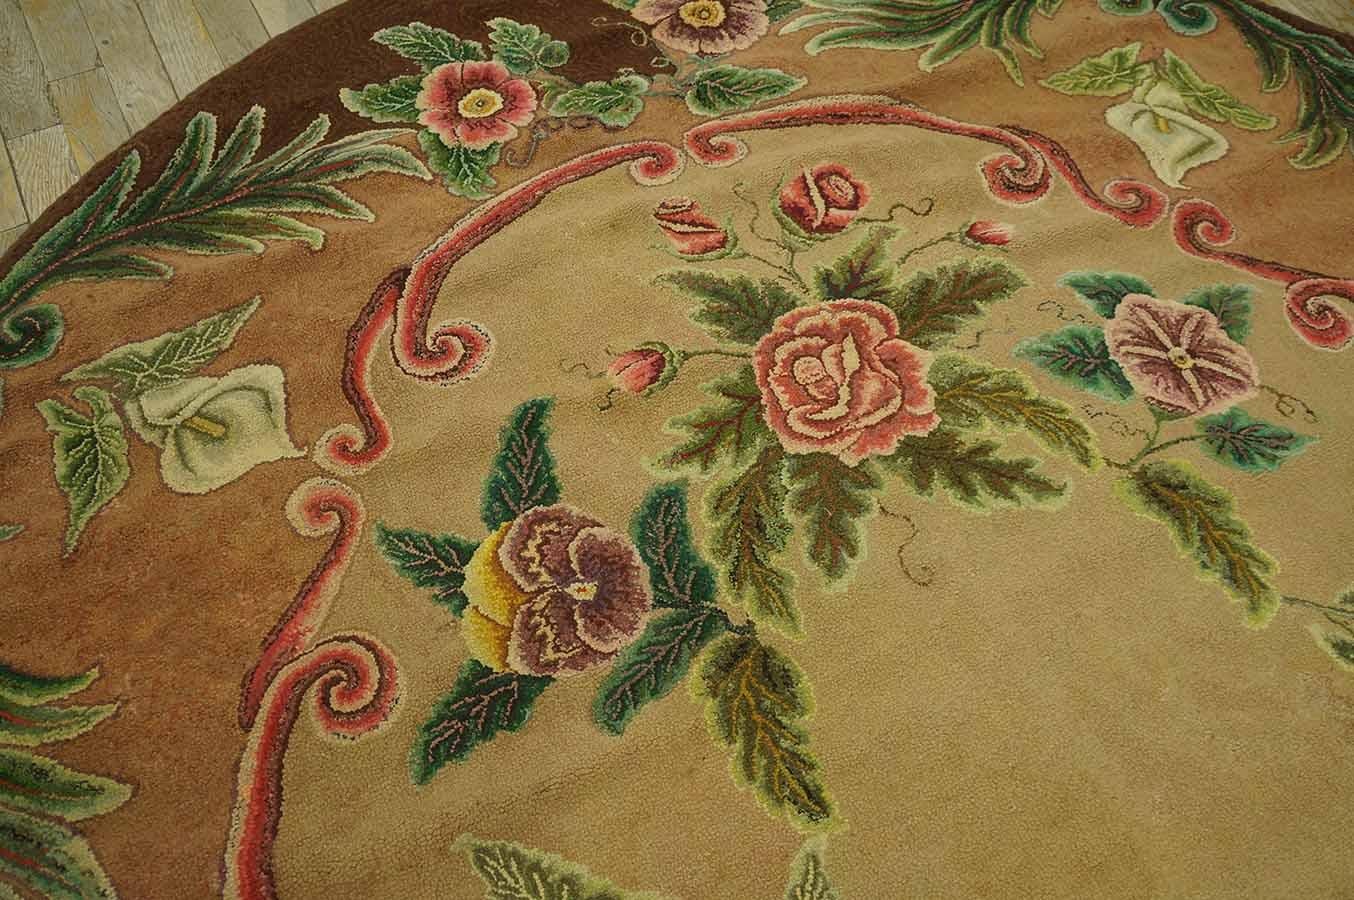 Early 20th Century American Hooked Rug ( 6'6